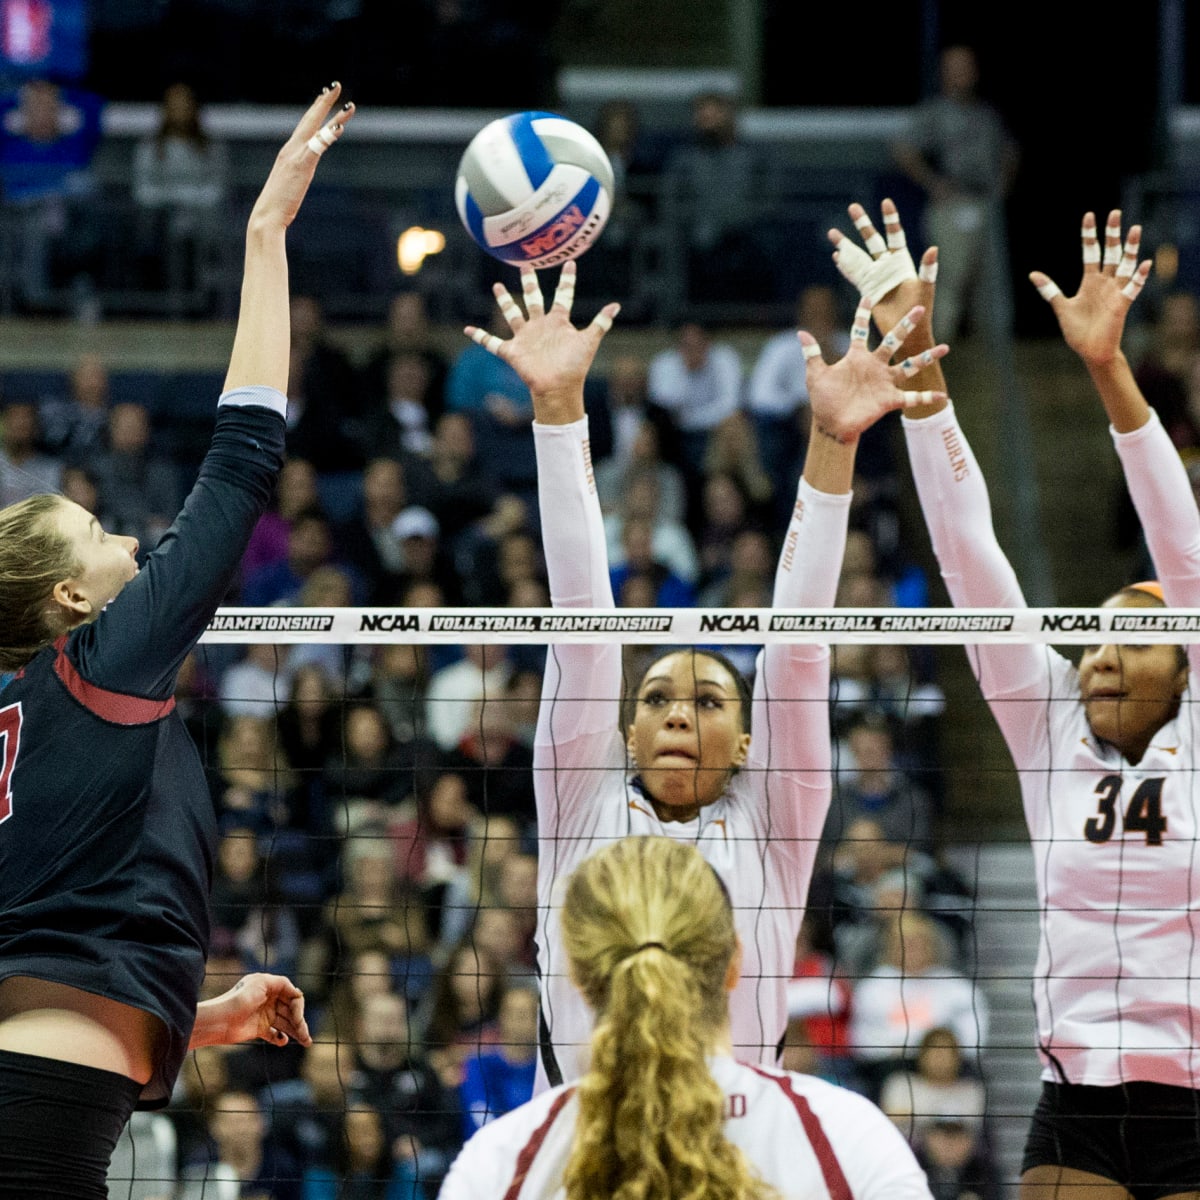 Oregon at Colorado Free Live Stream Womens College Volleyball - How to Watch and Stream Major League and College Sports